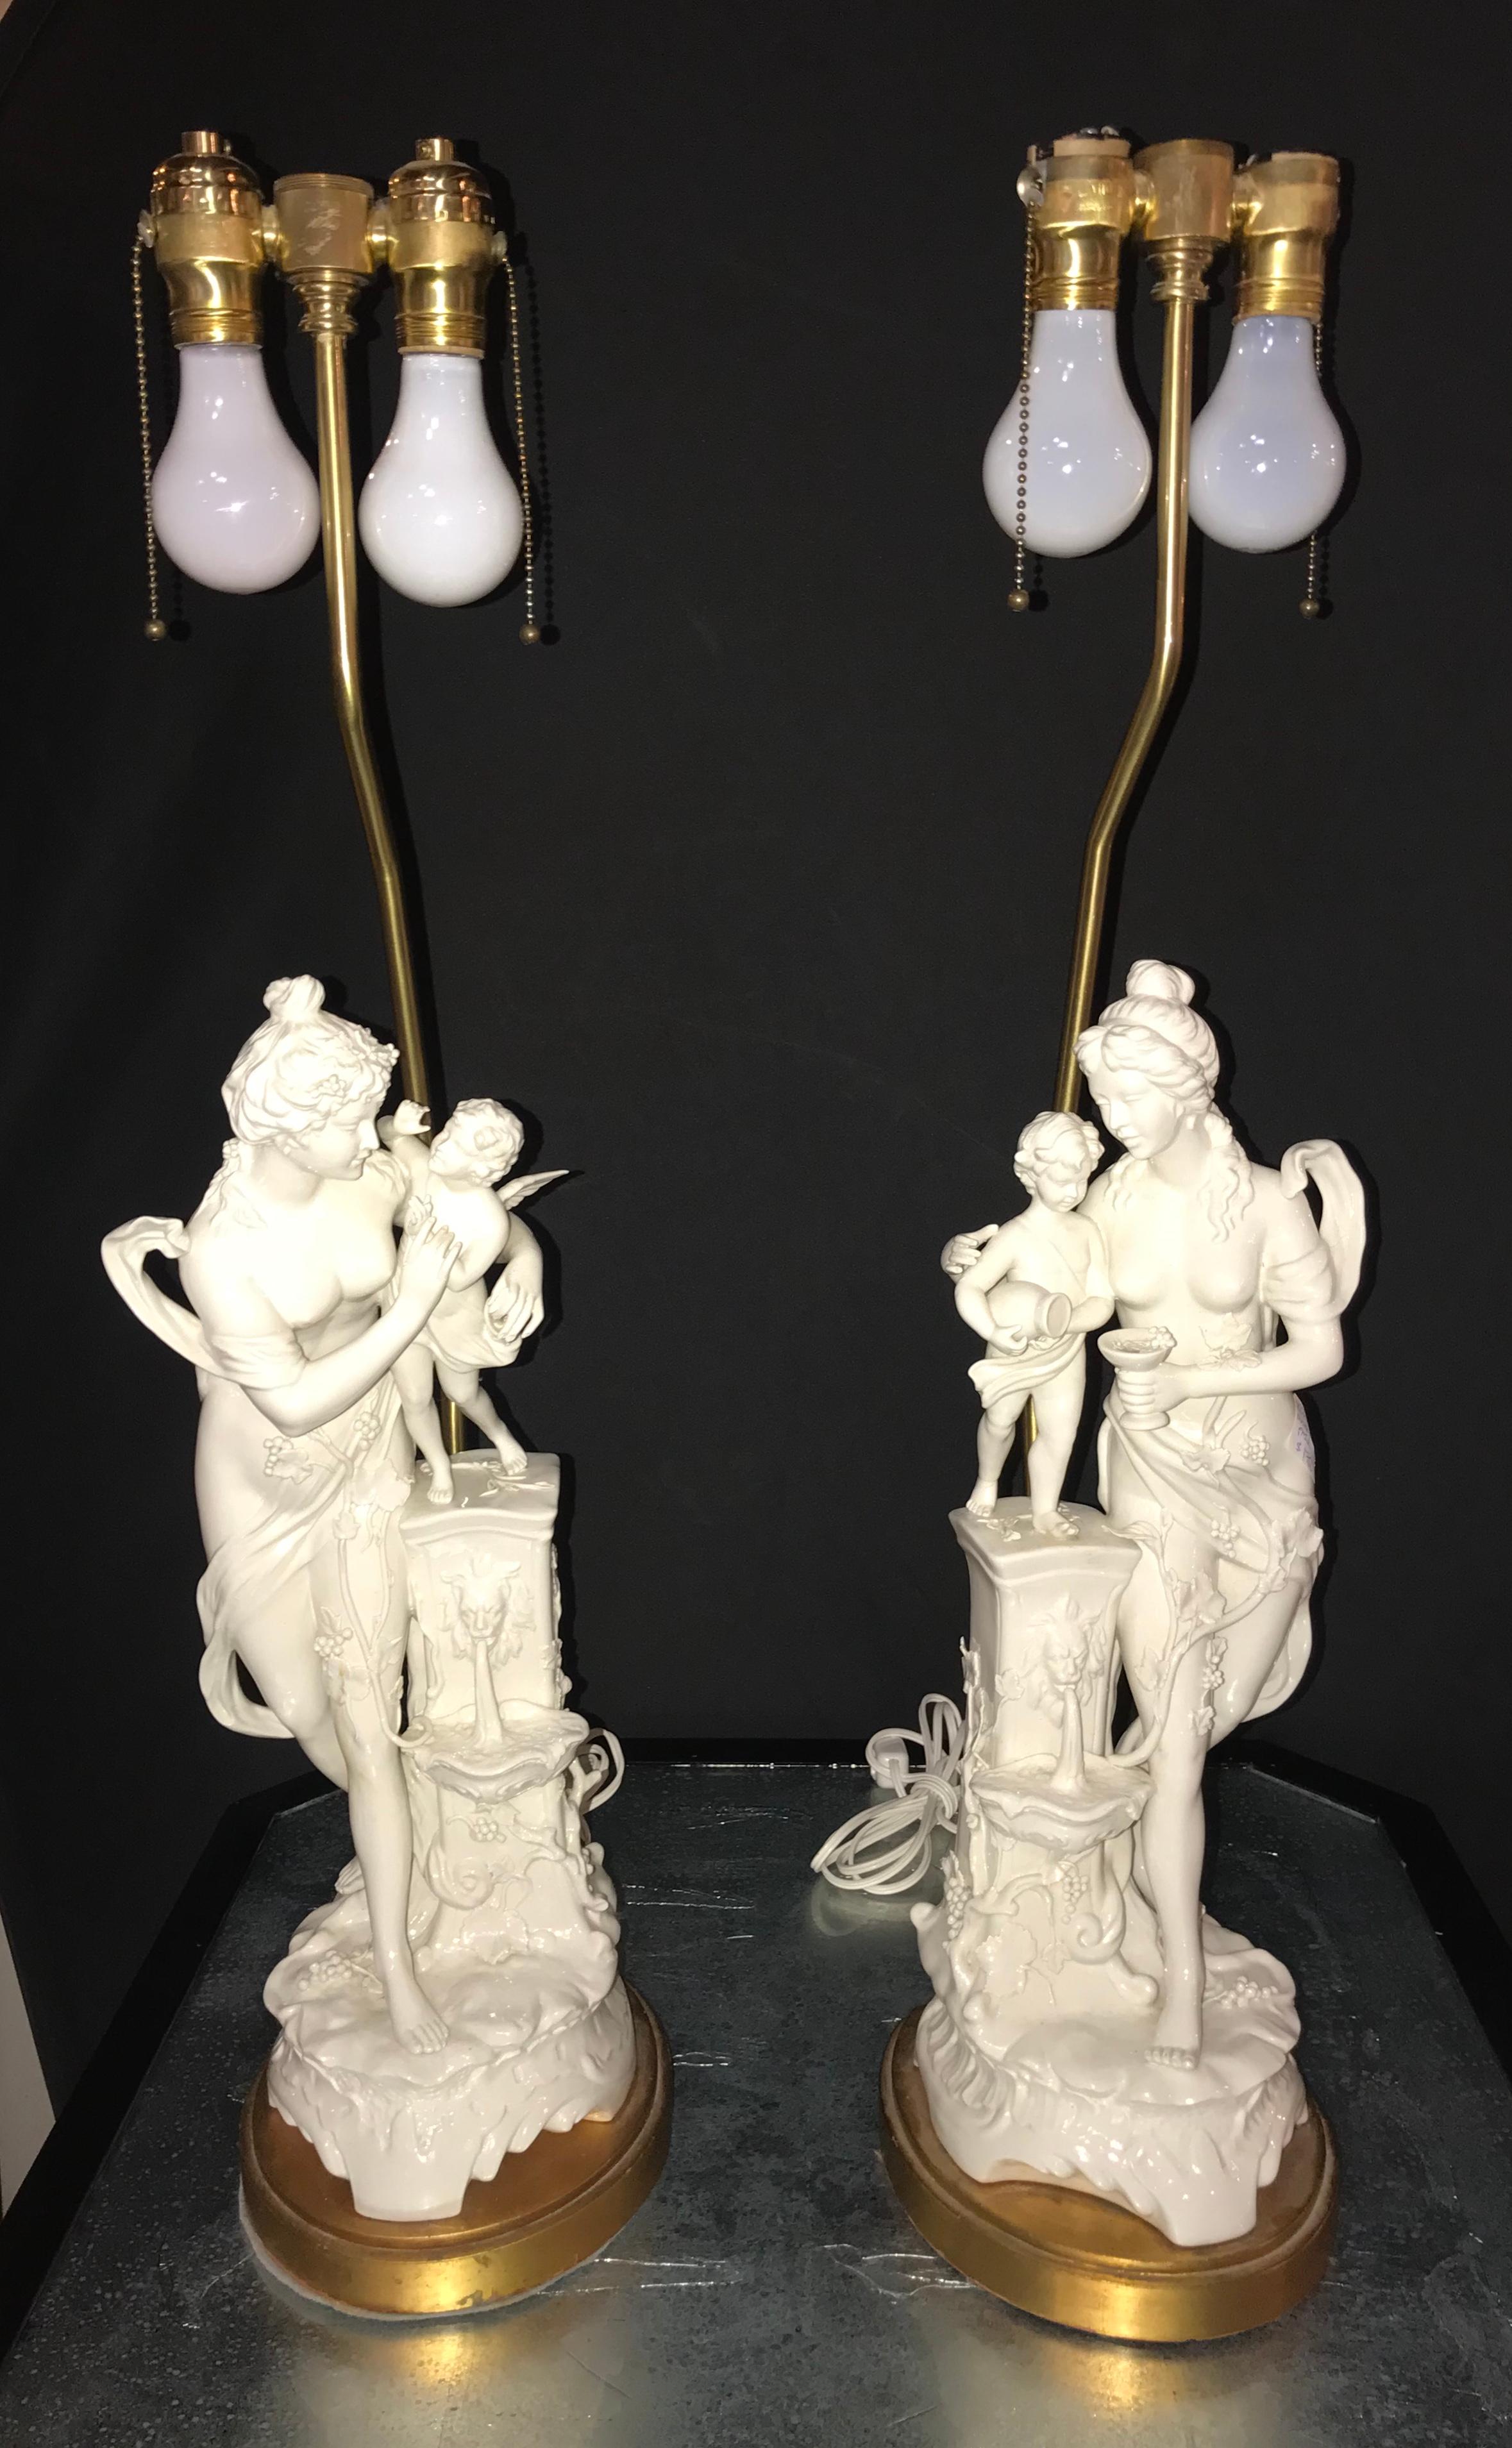 Pair of large porcelain figural opposing woman and child table lamps. This fine pair of antique table lamps are spectacularly done in a white porcelain finish with each bare breasted woman paying attention to a winged angel. One cherub having a wine